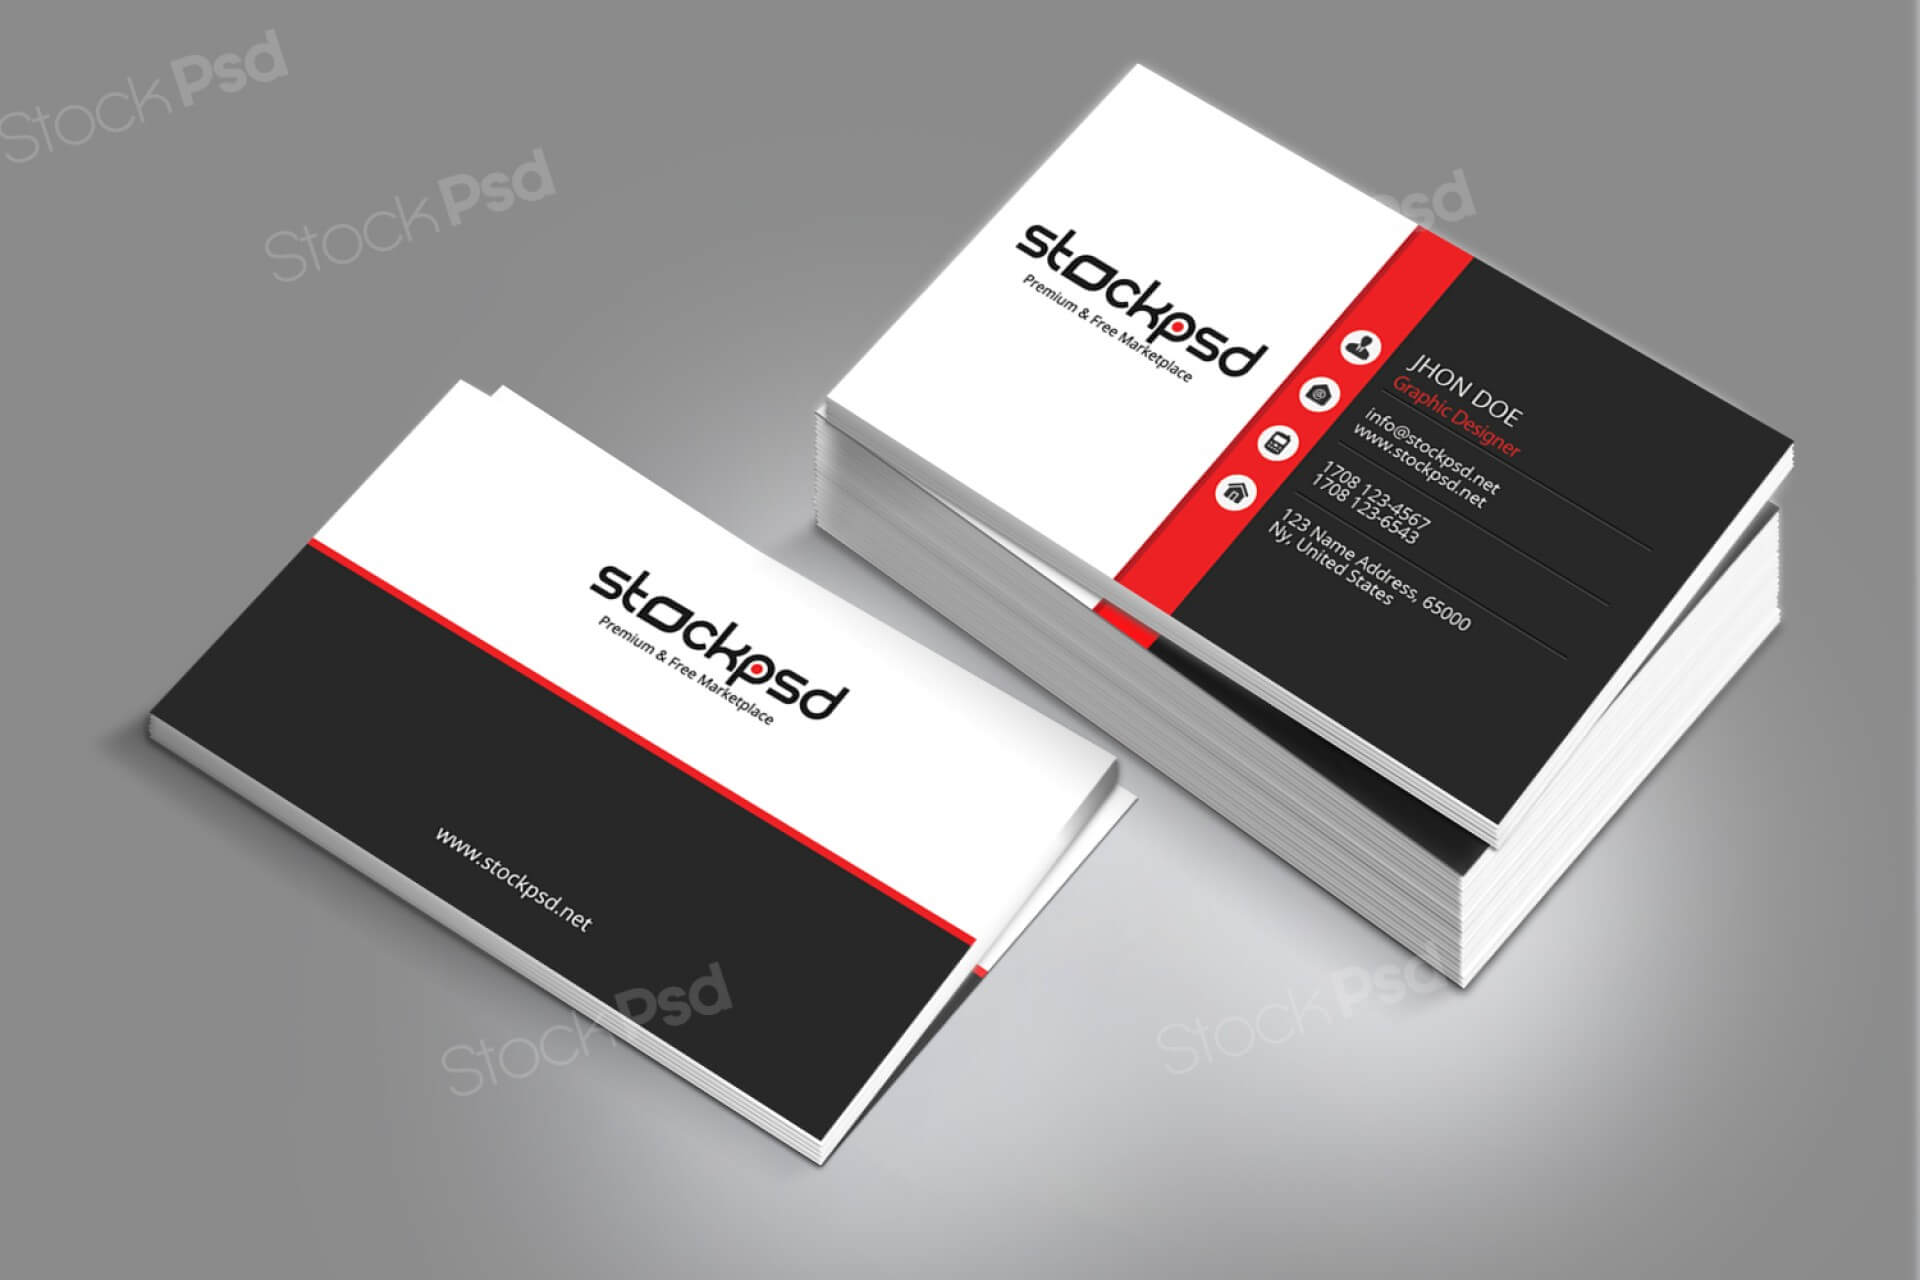 018 Personal Business Cards Template Card Imposing Ideas Regarding Free Personal Business Card Templates